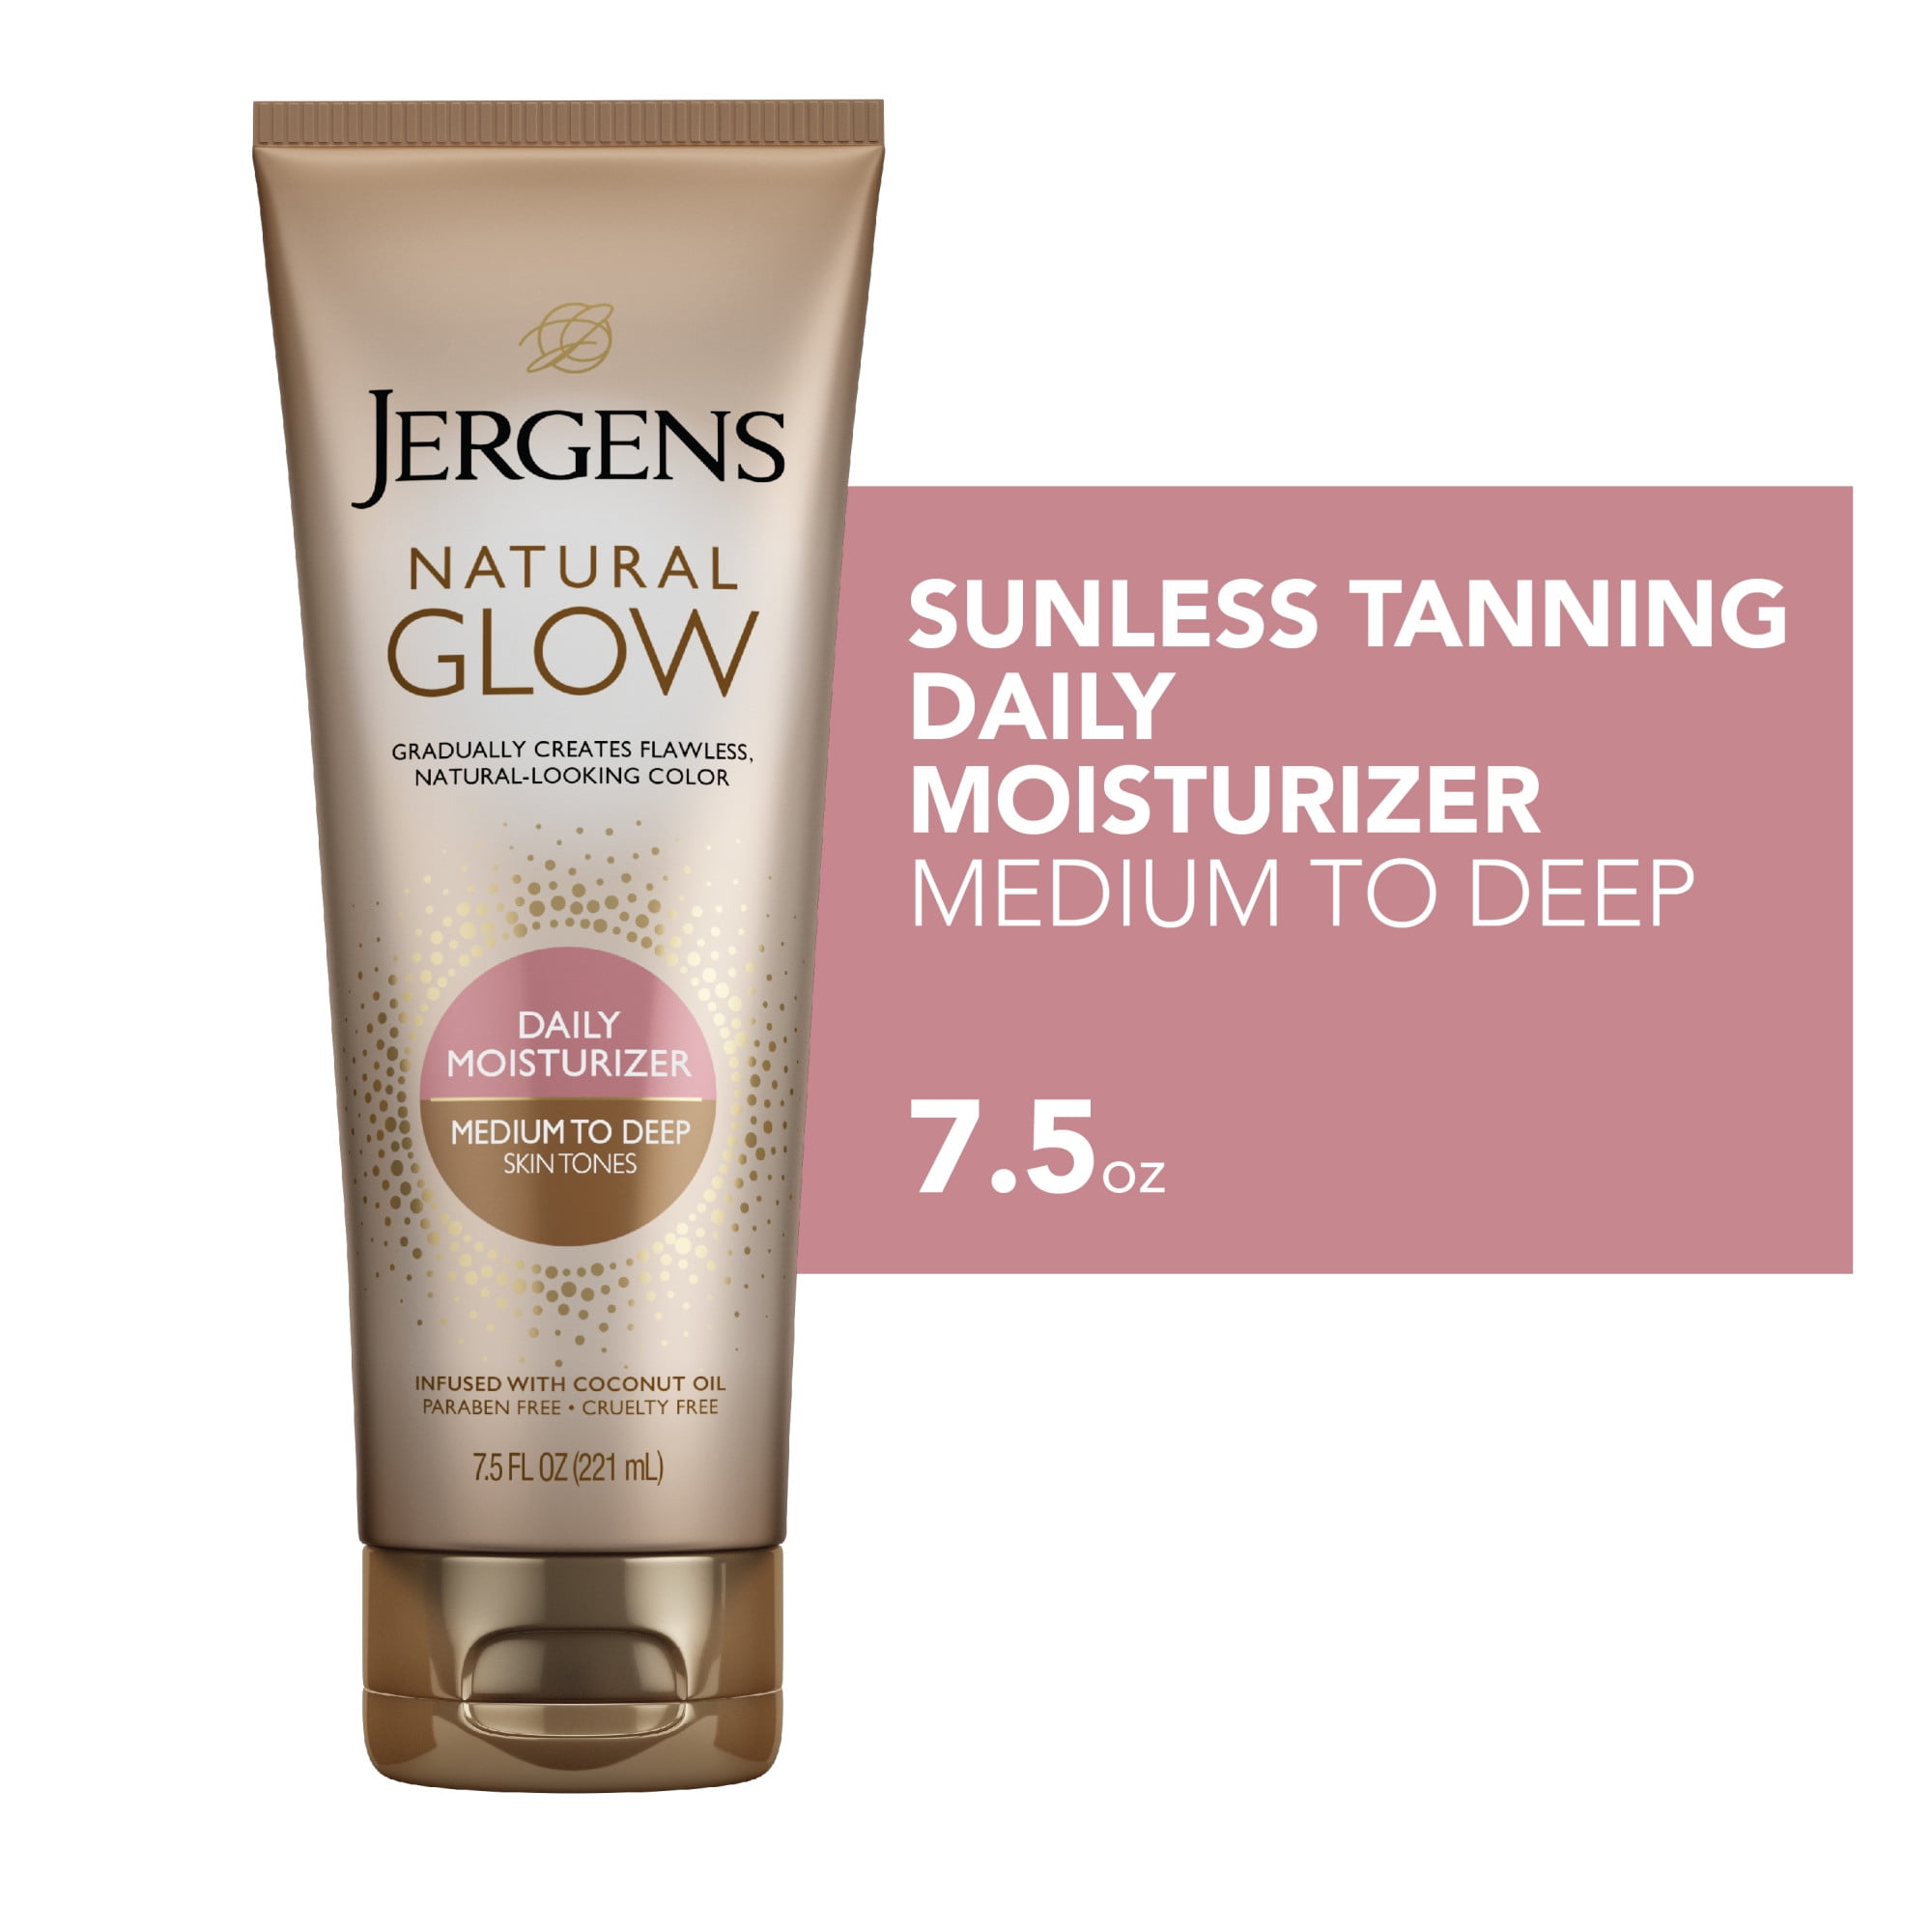 Jergens Natural Glow Sunless Tanning Daily Body Lotion, Medium to Deep Skin Tone, 7.5 fl oz